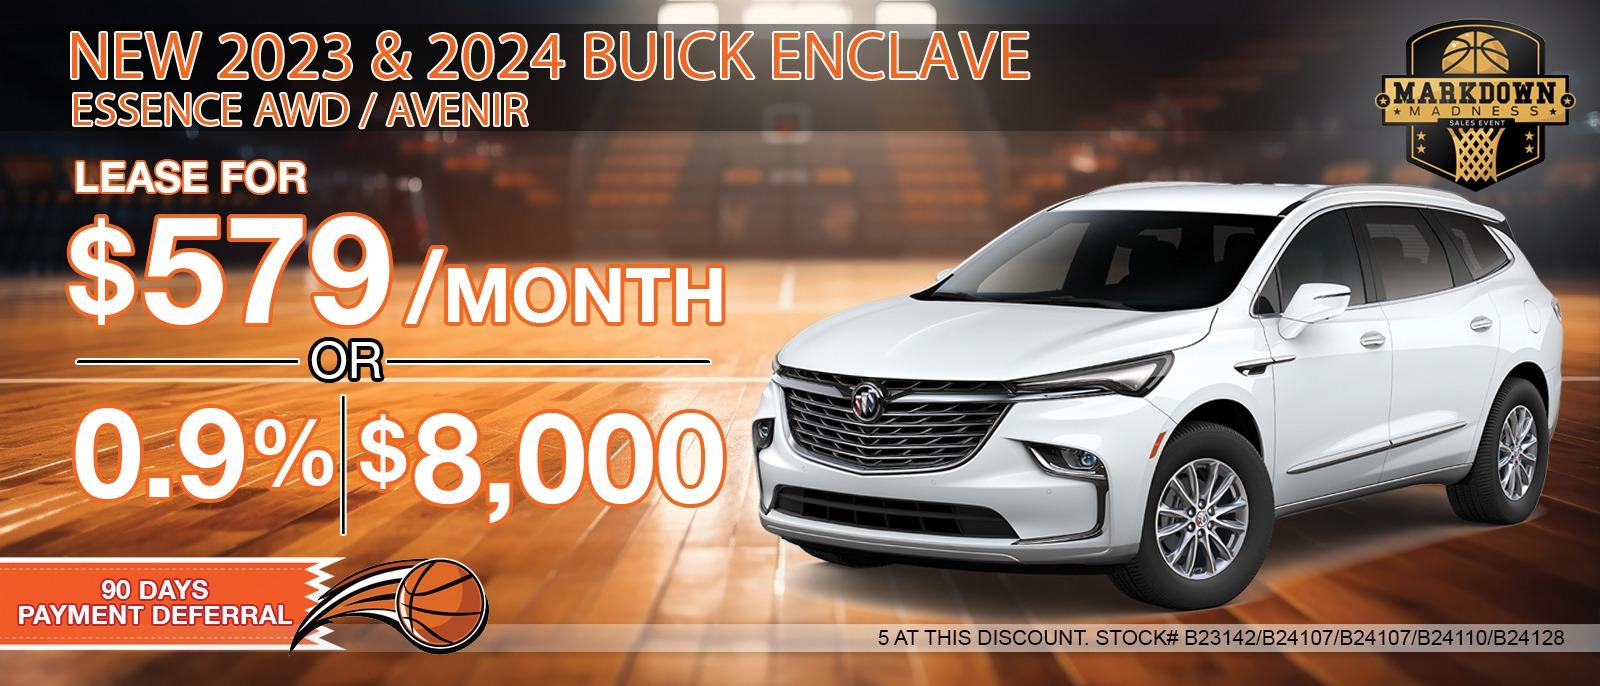 2024 Buick Enclave | Essence / Avenir AWD. Your Net Savings After All Offers $8,000 OFF MSRP.